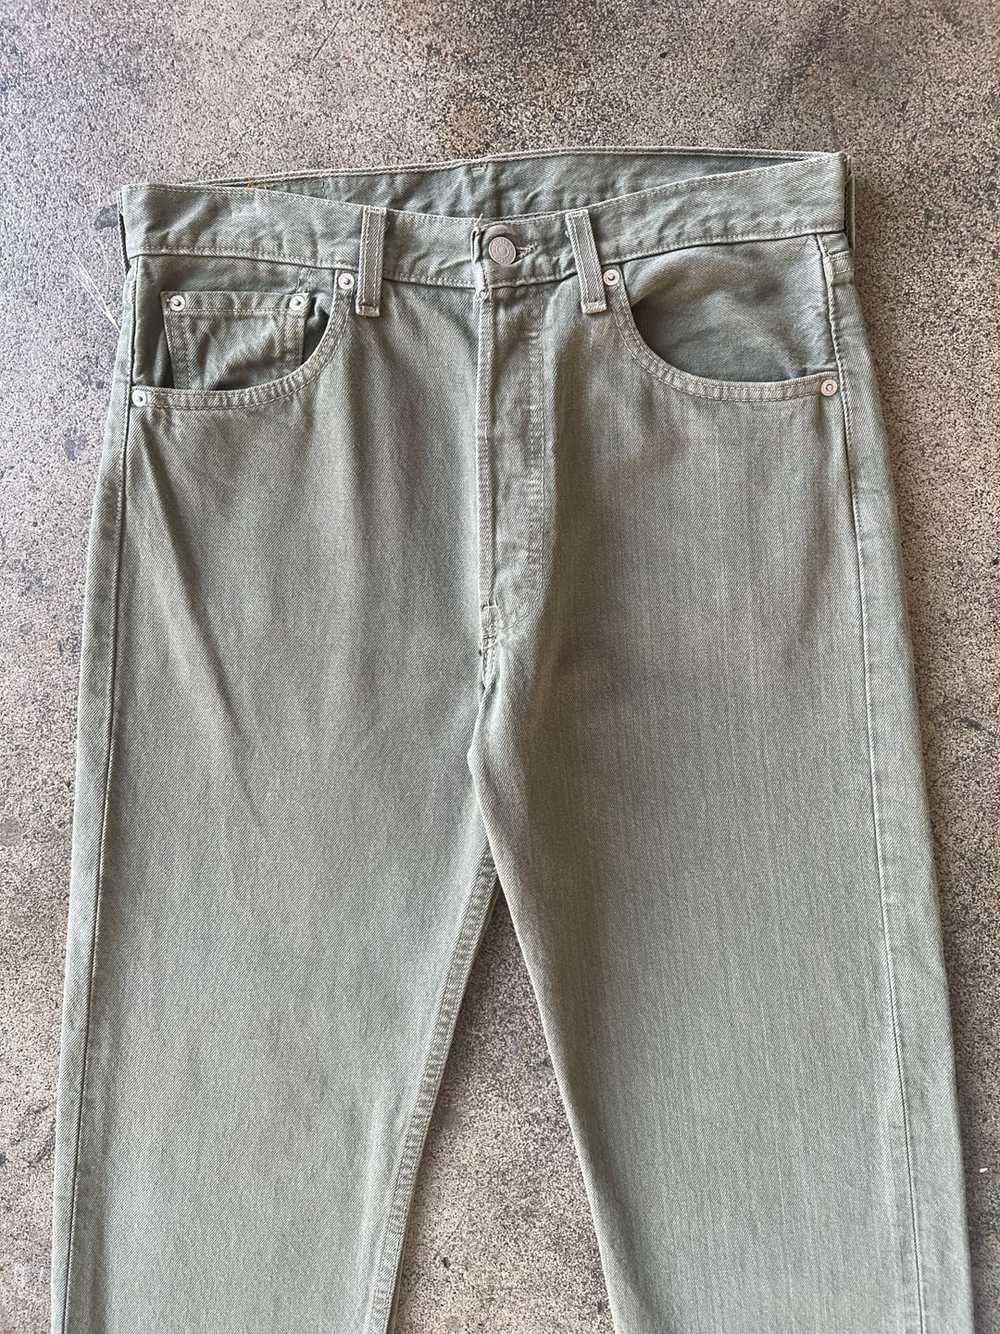 1990s Levi's 501 Faded Green Jeans 33" x 30" - image 2